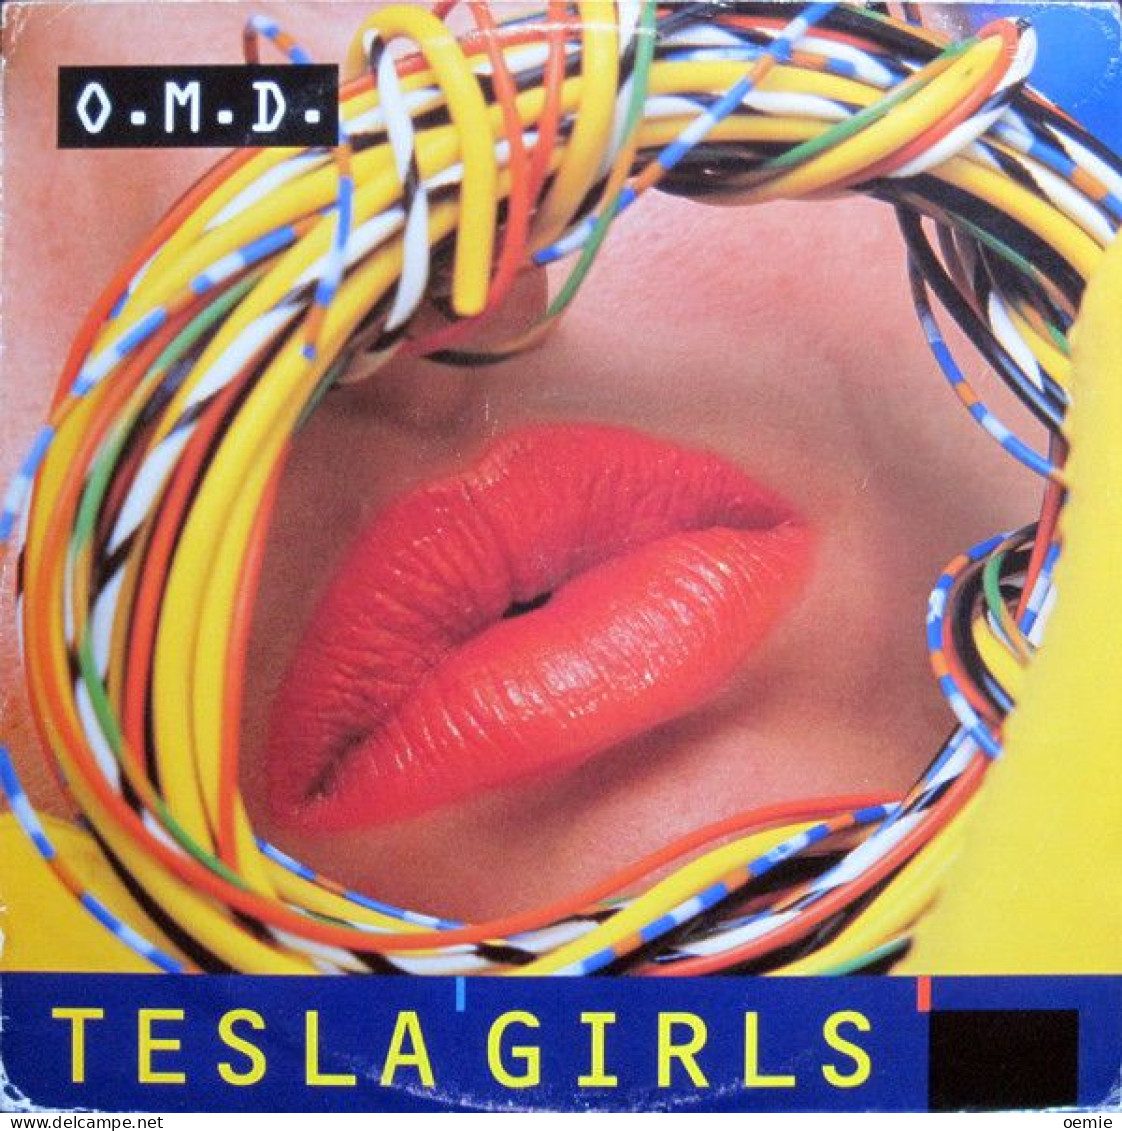 ORCHESTRAL  MANOEUVRES  IN THE DARK    TESLA  GIRLS - 45 Rpm - Maxi-Singles